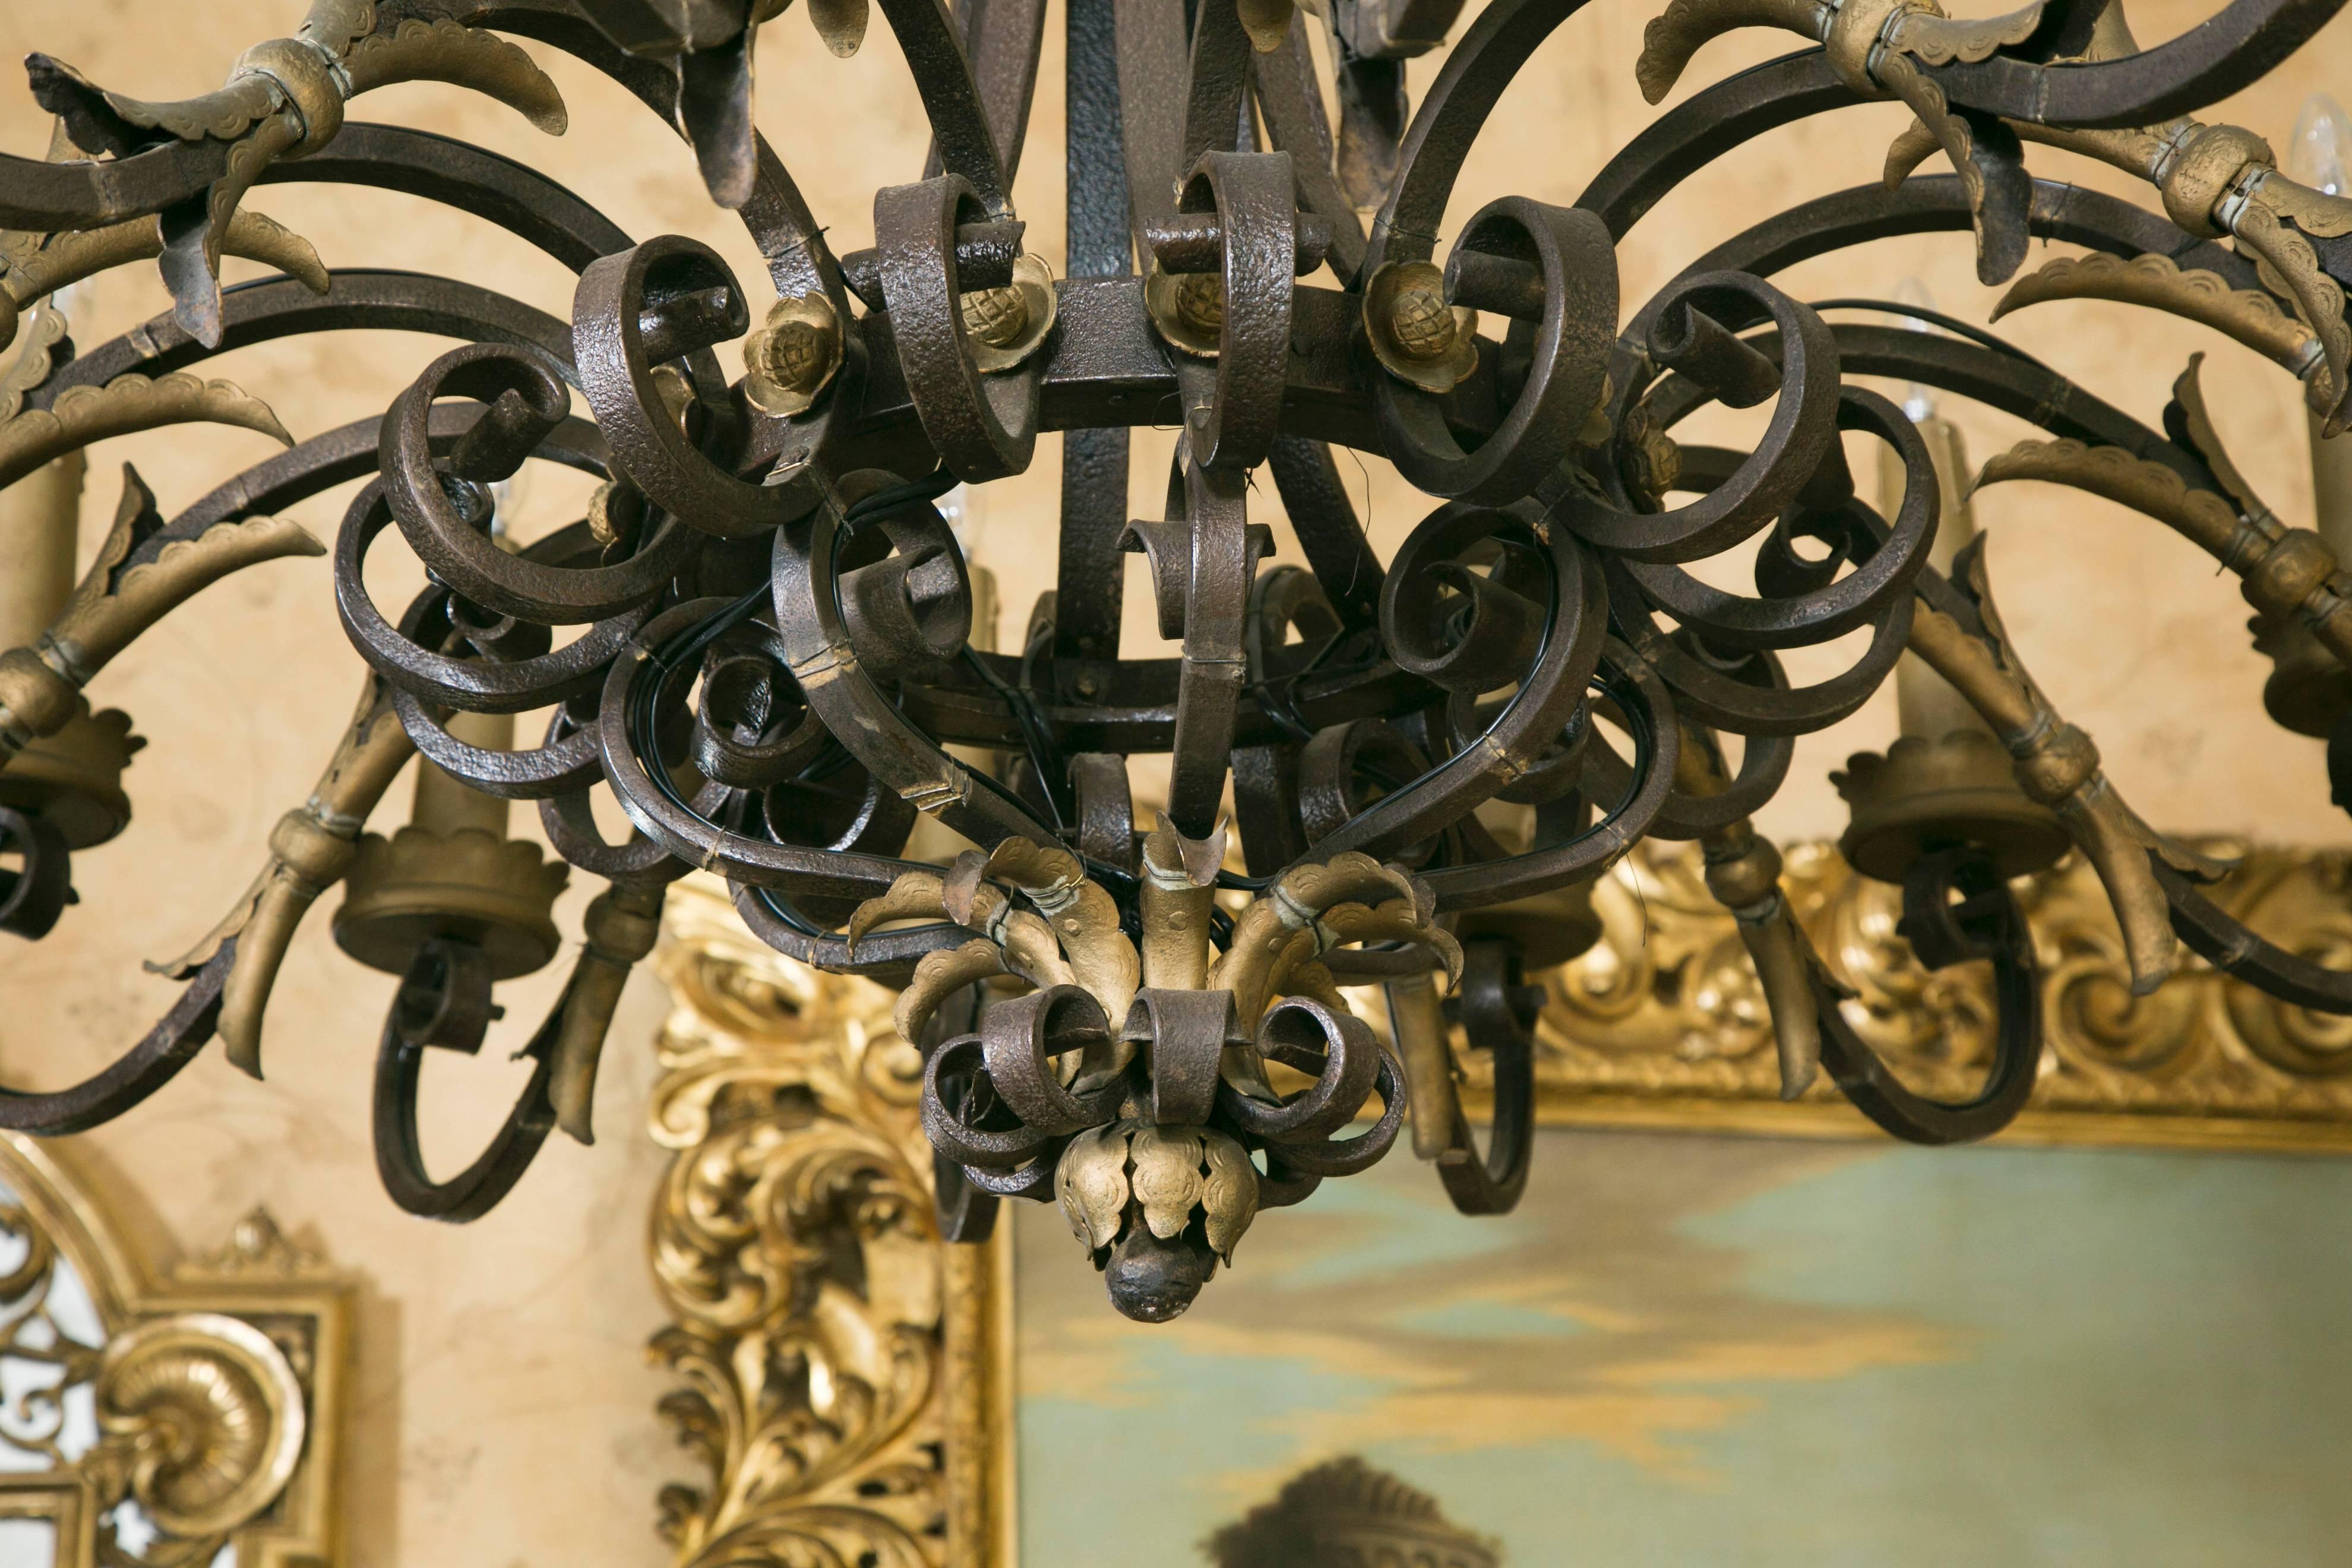 Wrought iron chandelier, 16 branches with light, some parts have a gold finish.
Wired at EU standard.